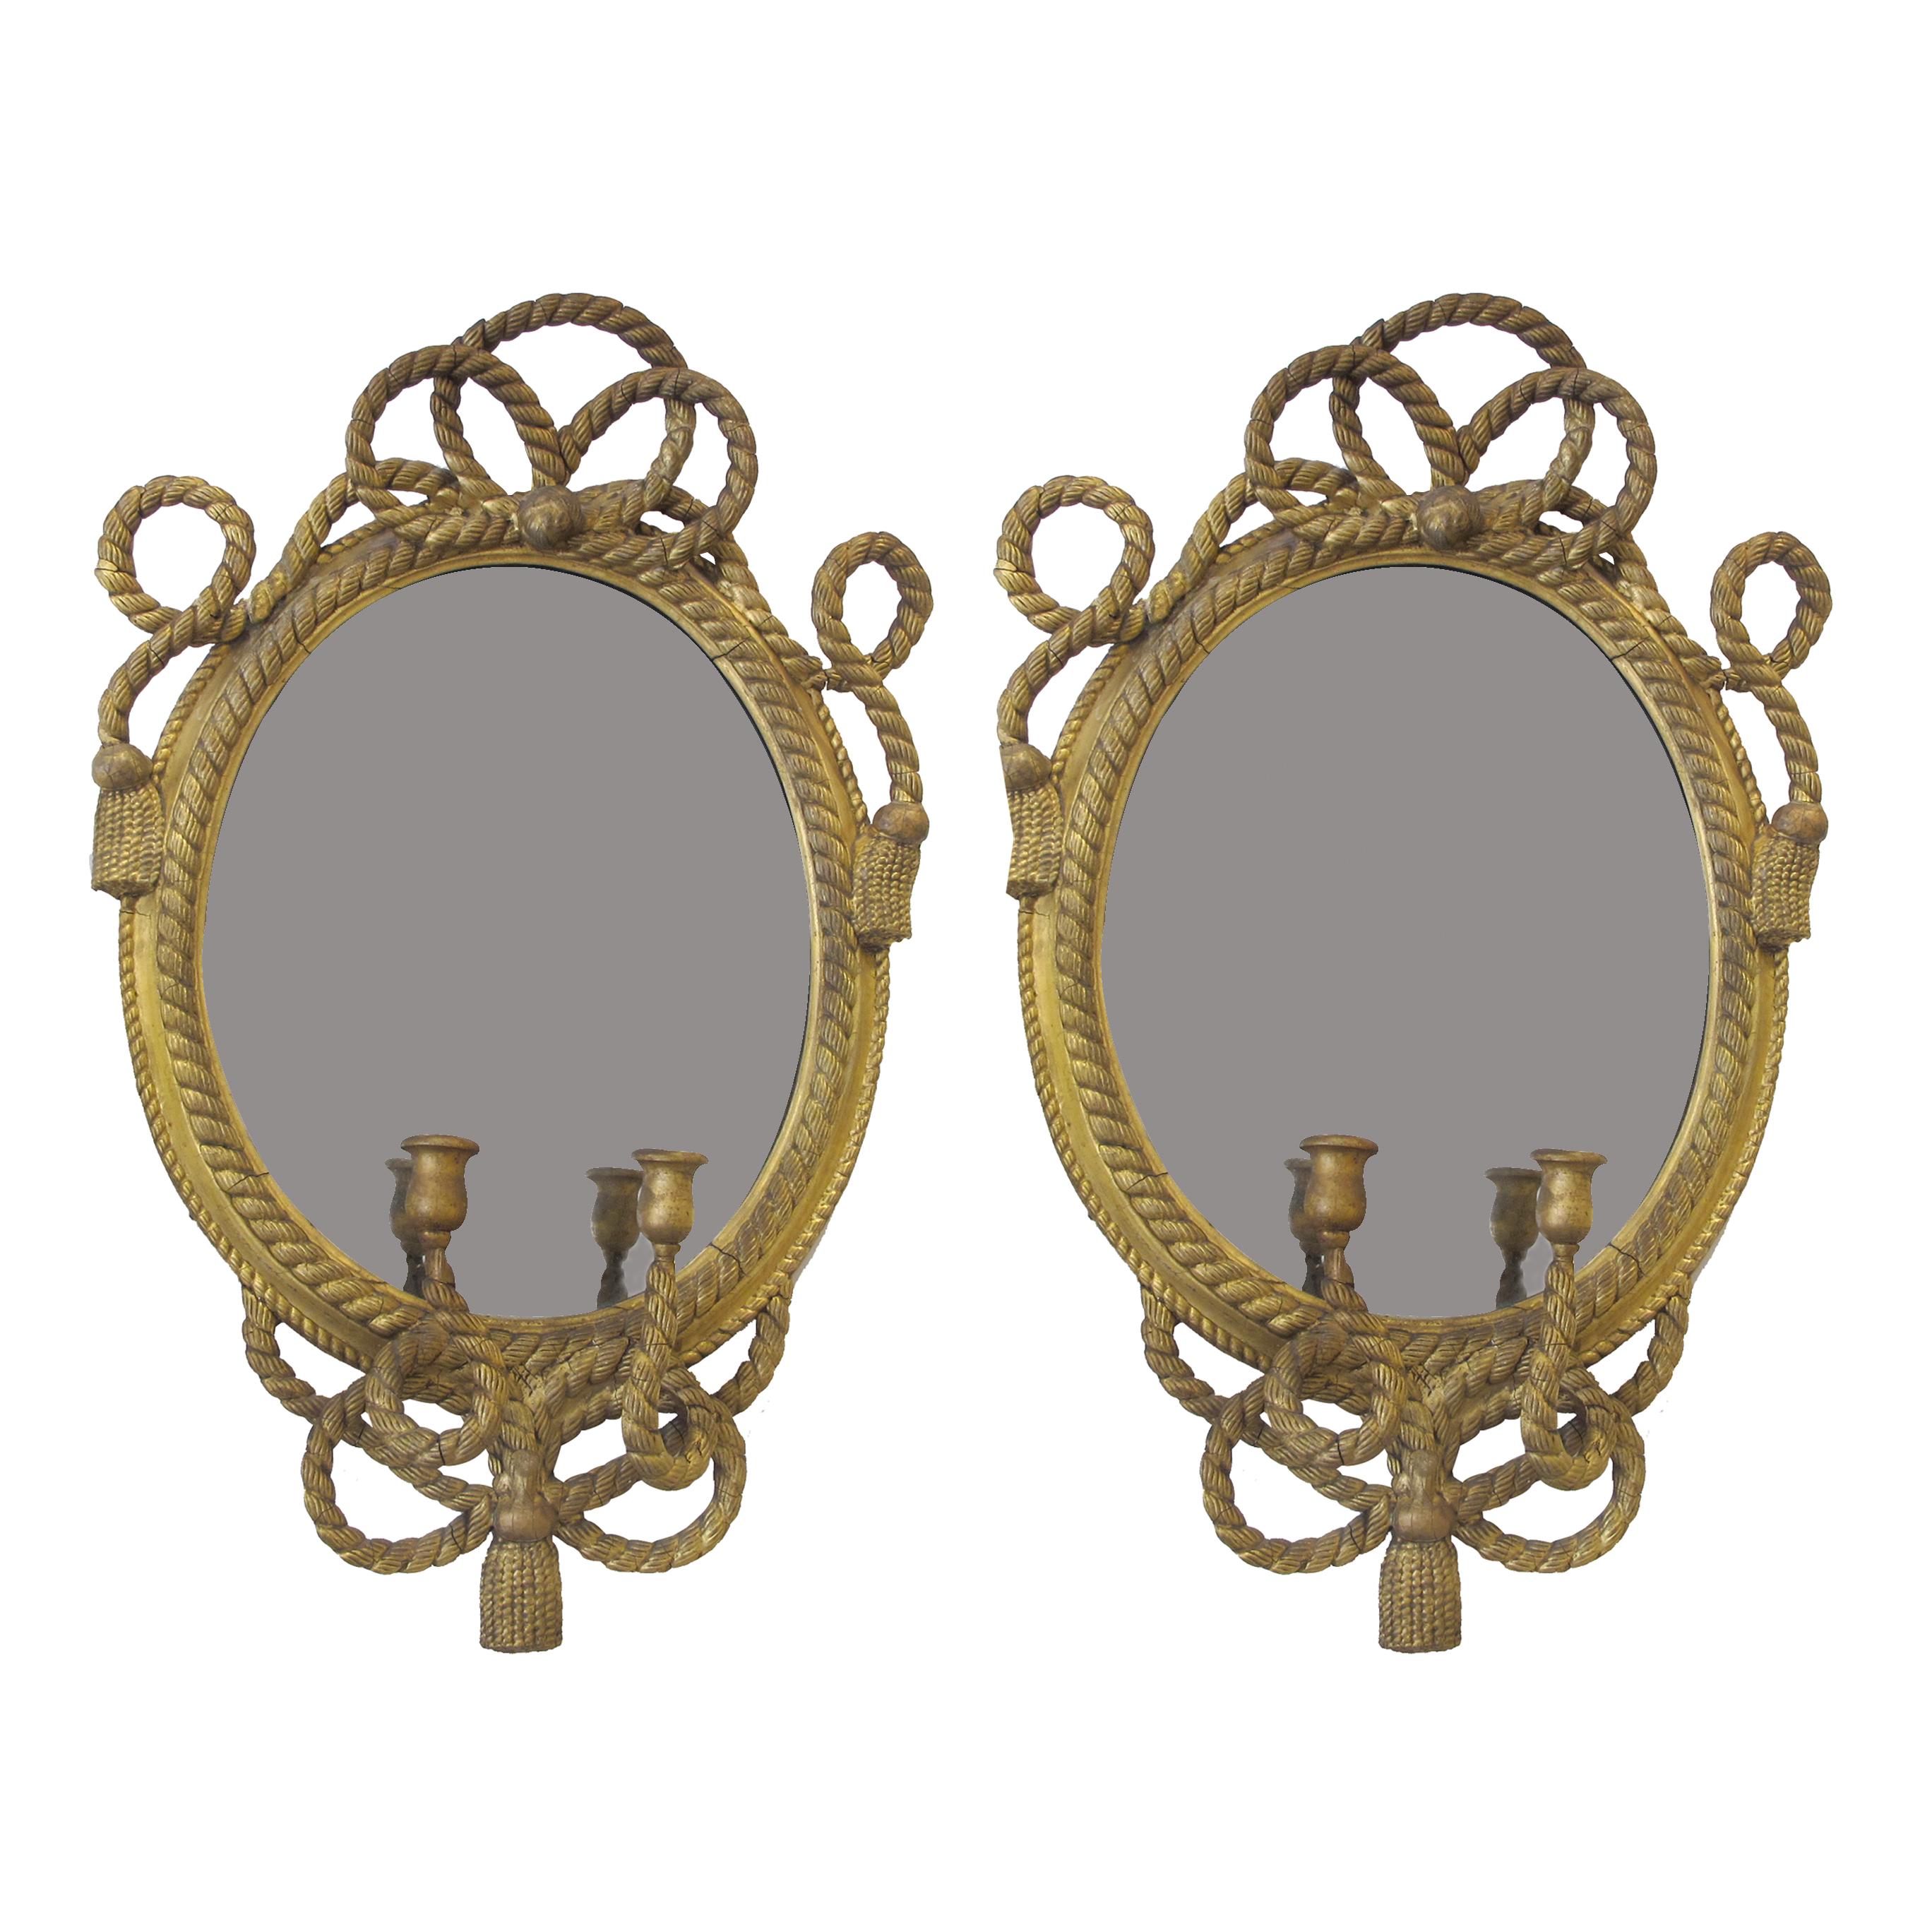 Pair of antique, early 19th century, maritime, gilt carved wood mirrored wall sconces with ornate nautical gilt ropes and two candle holders on each one. The original mirrored glass shows signs of age-related foxing which adds charm and character to